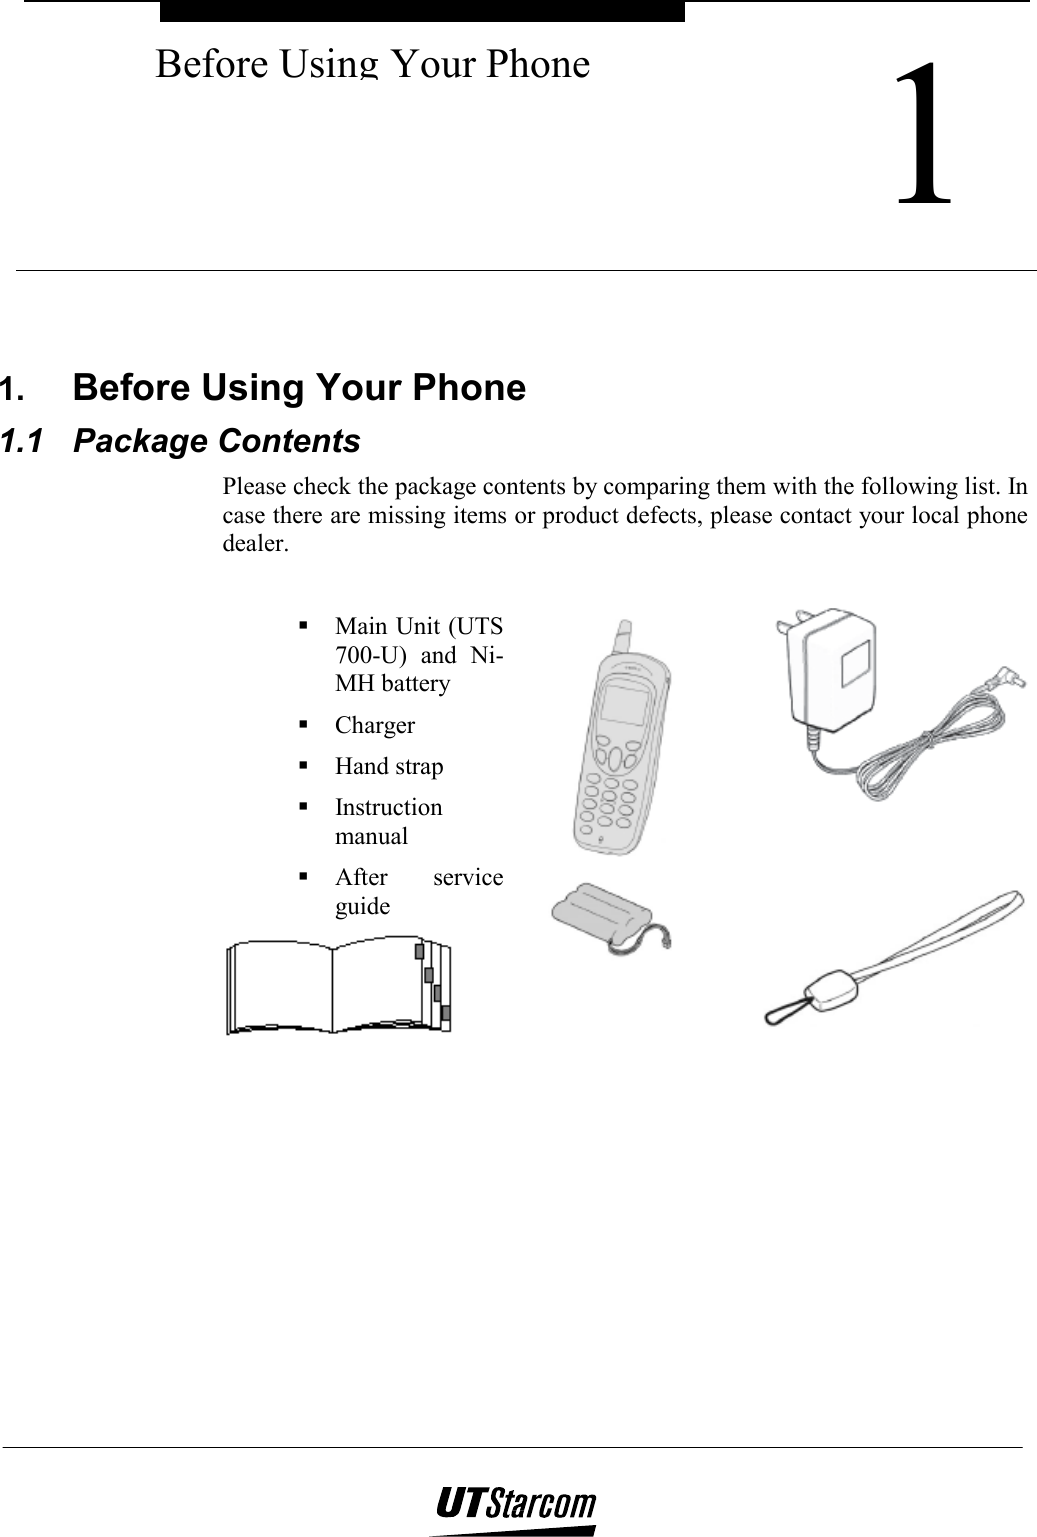  1Before Using Your Phone   1.  Before Using Your Phone 1.1 Package Contents Please check the package contents by comparing them with the following list. In case there are missing items or product defects, please contact your local phone dealer.   Main Unit (UTS 700-U) and Ni-MH battery  Charger  Hand strap  Instruction manual  After service guide  